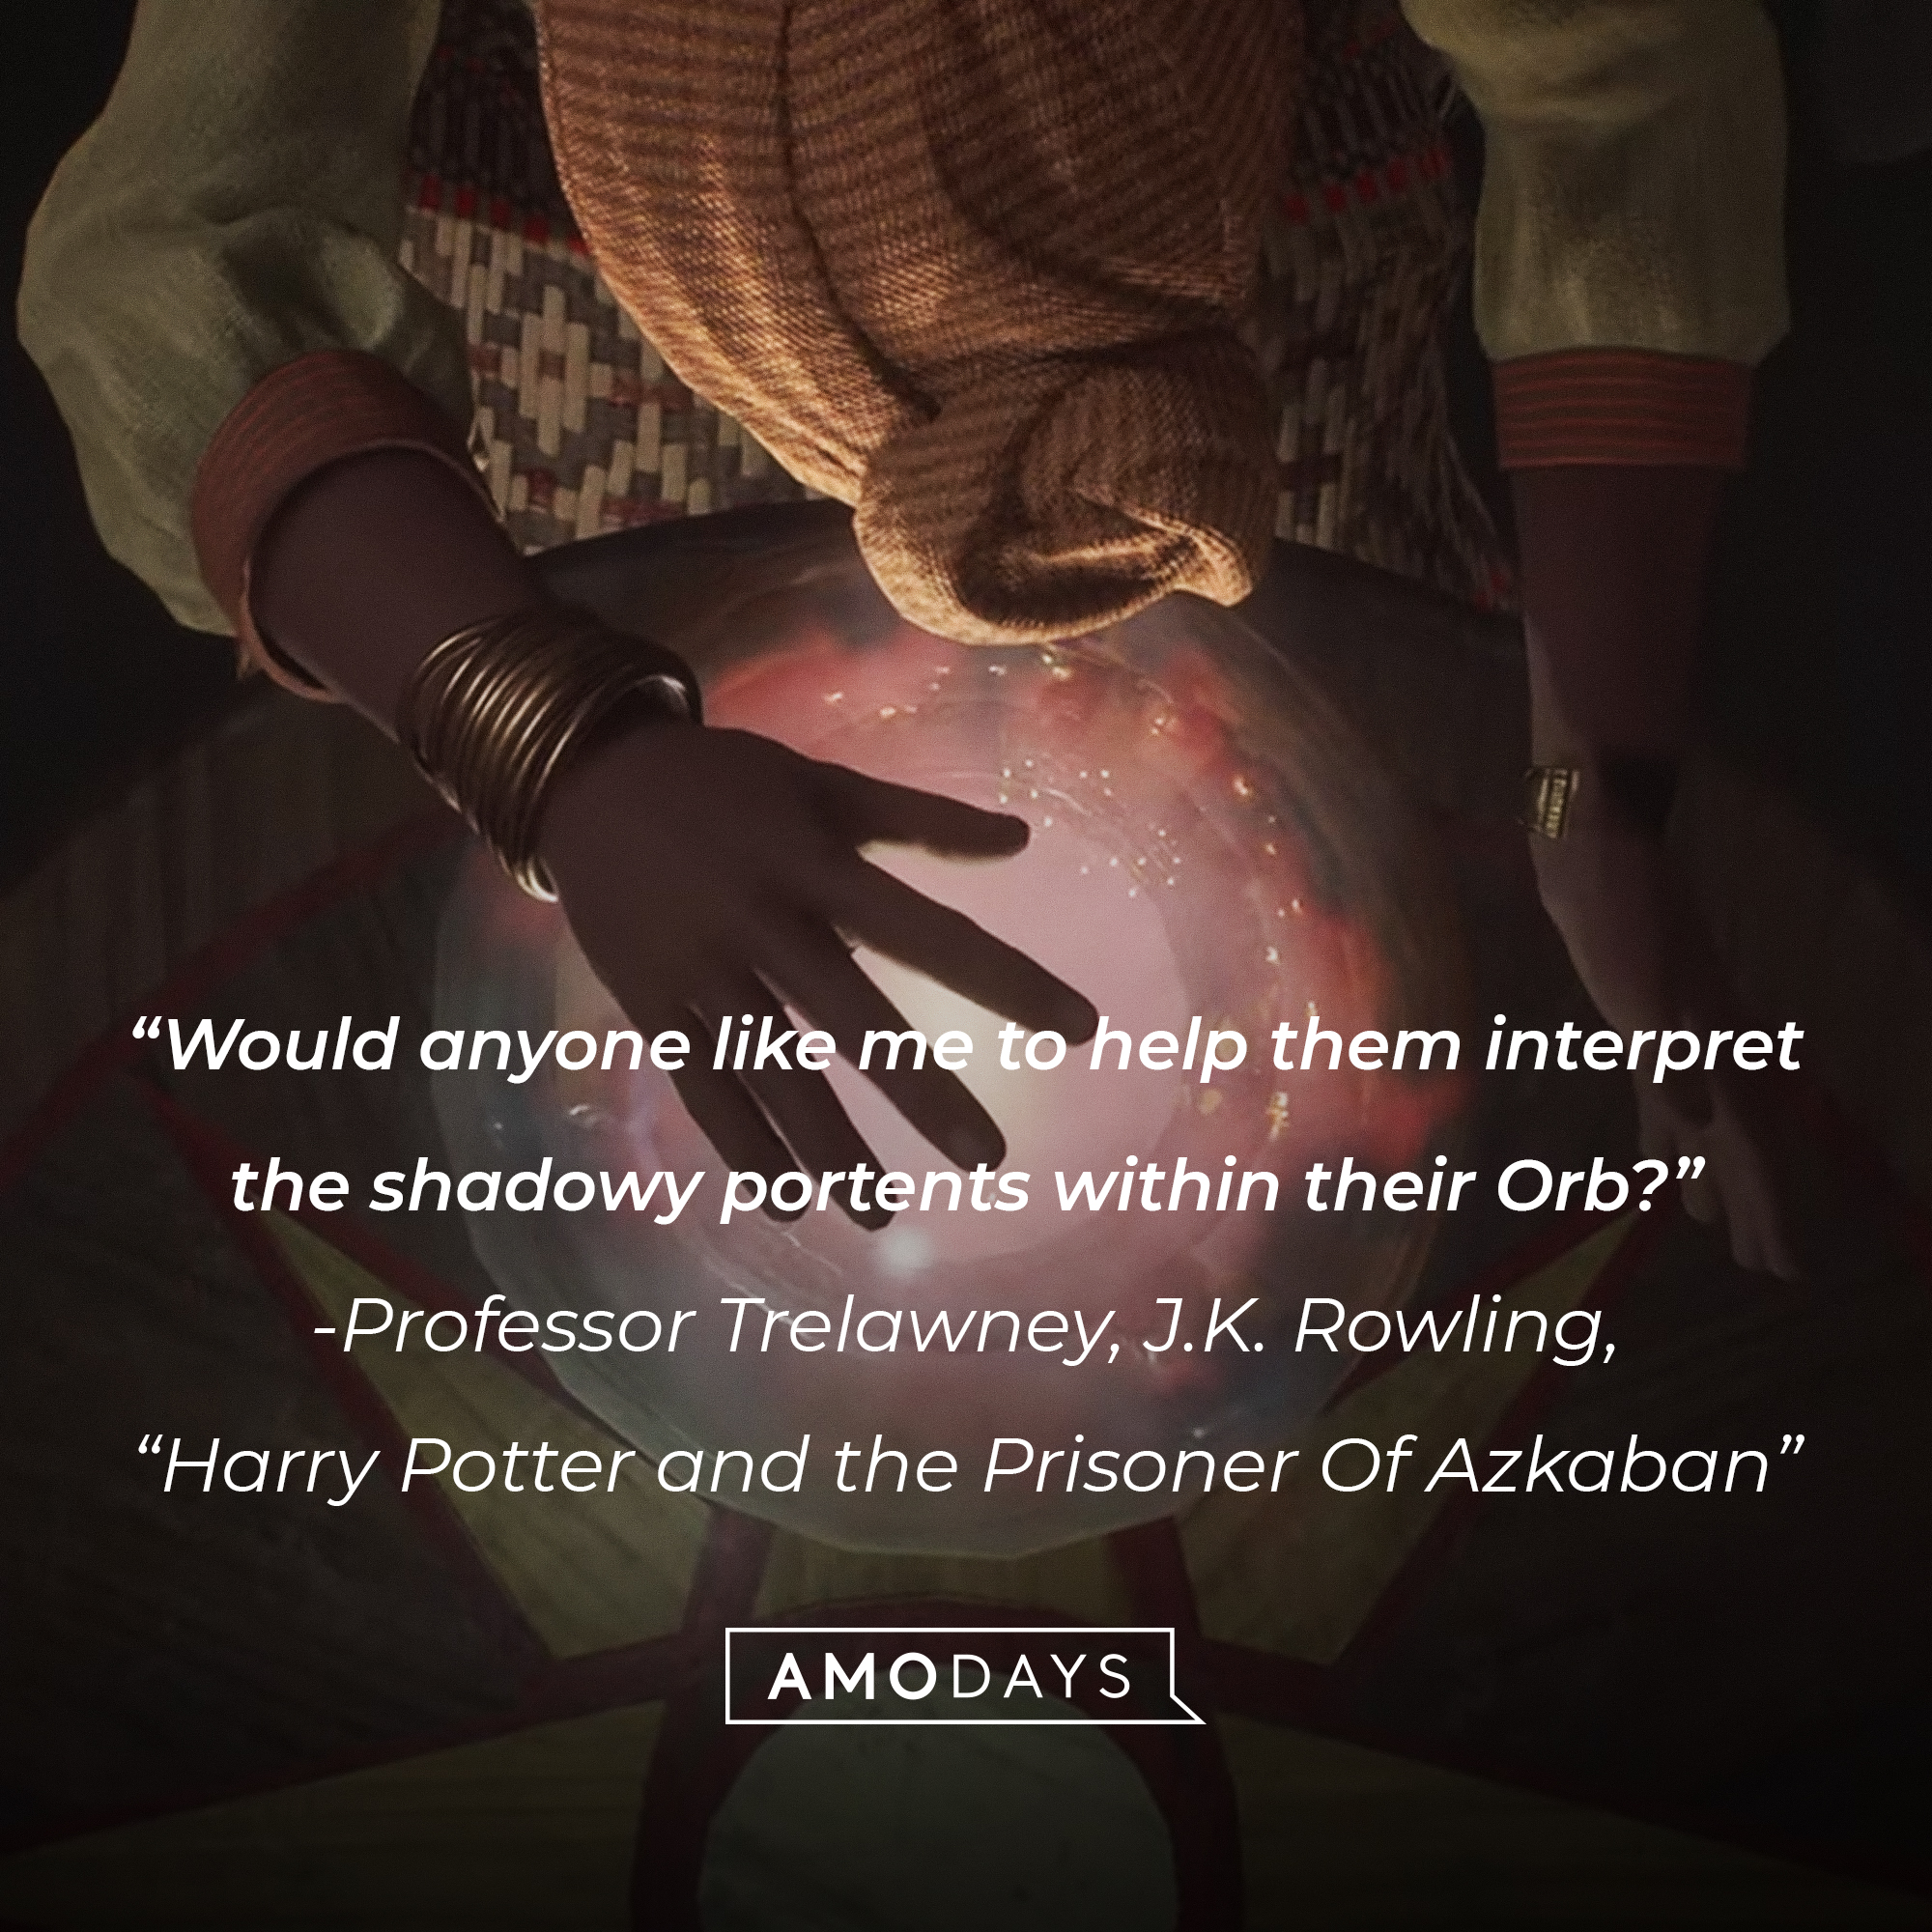 Professor Trelawney’s quote from J.K Rowling’s “Harry Potter and the Prisoner of Azkaban." : Would anyone like me to help them interpret the shadowy portents within their Orb?” | Source: youtube.com/HogwartsLegacy